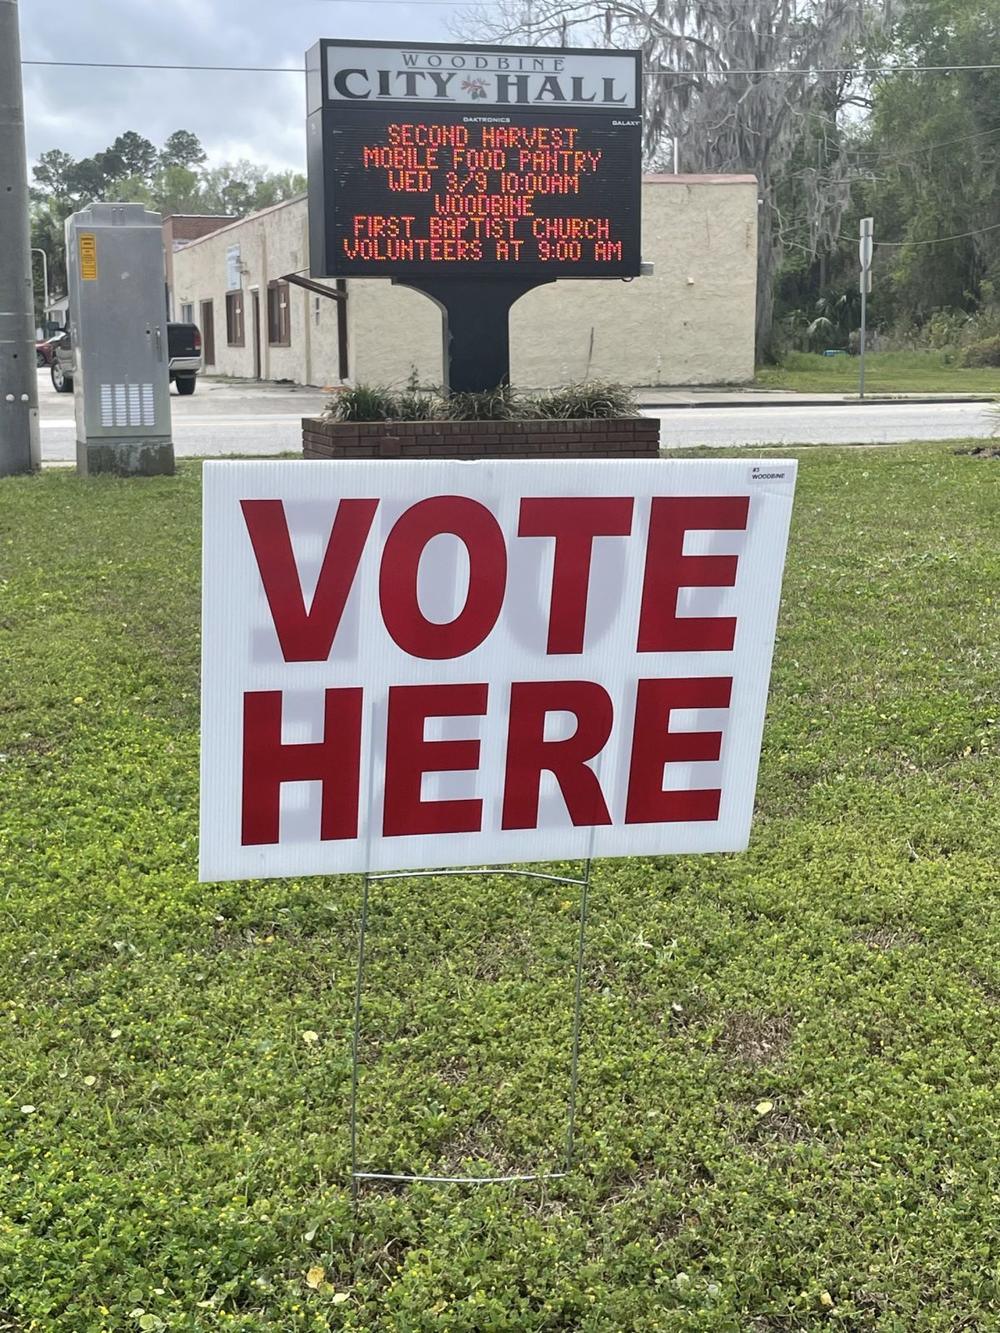 Camden opened 14 polling places, including the Woodbine City Hall.